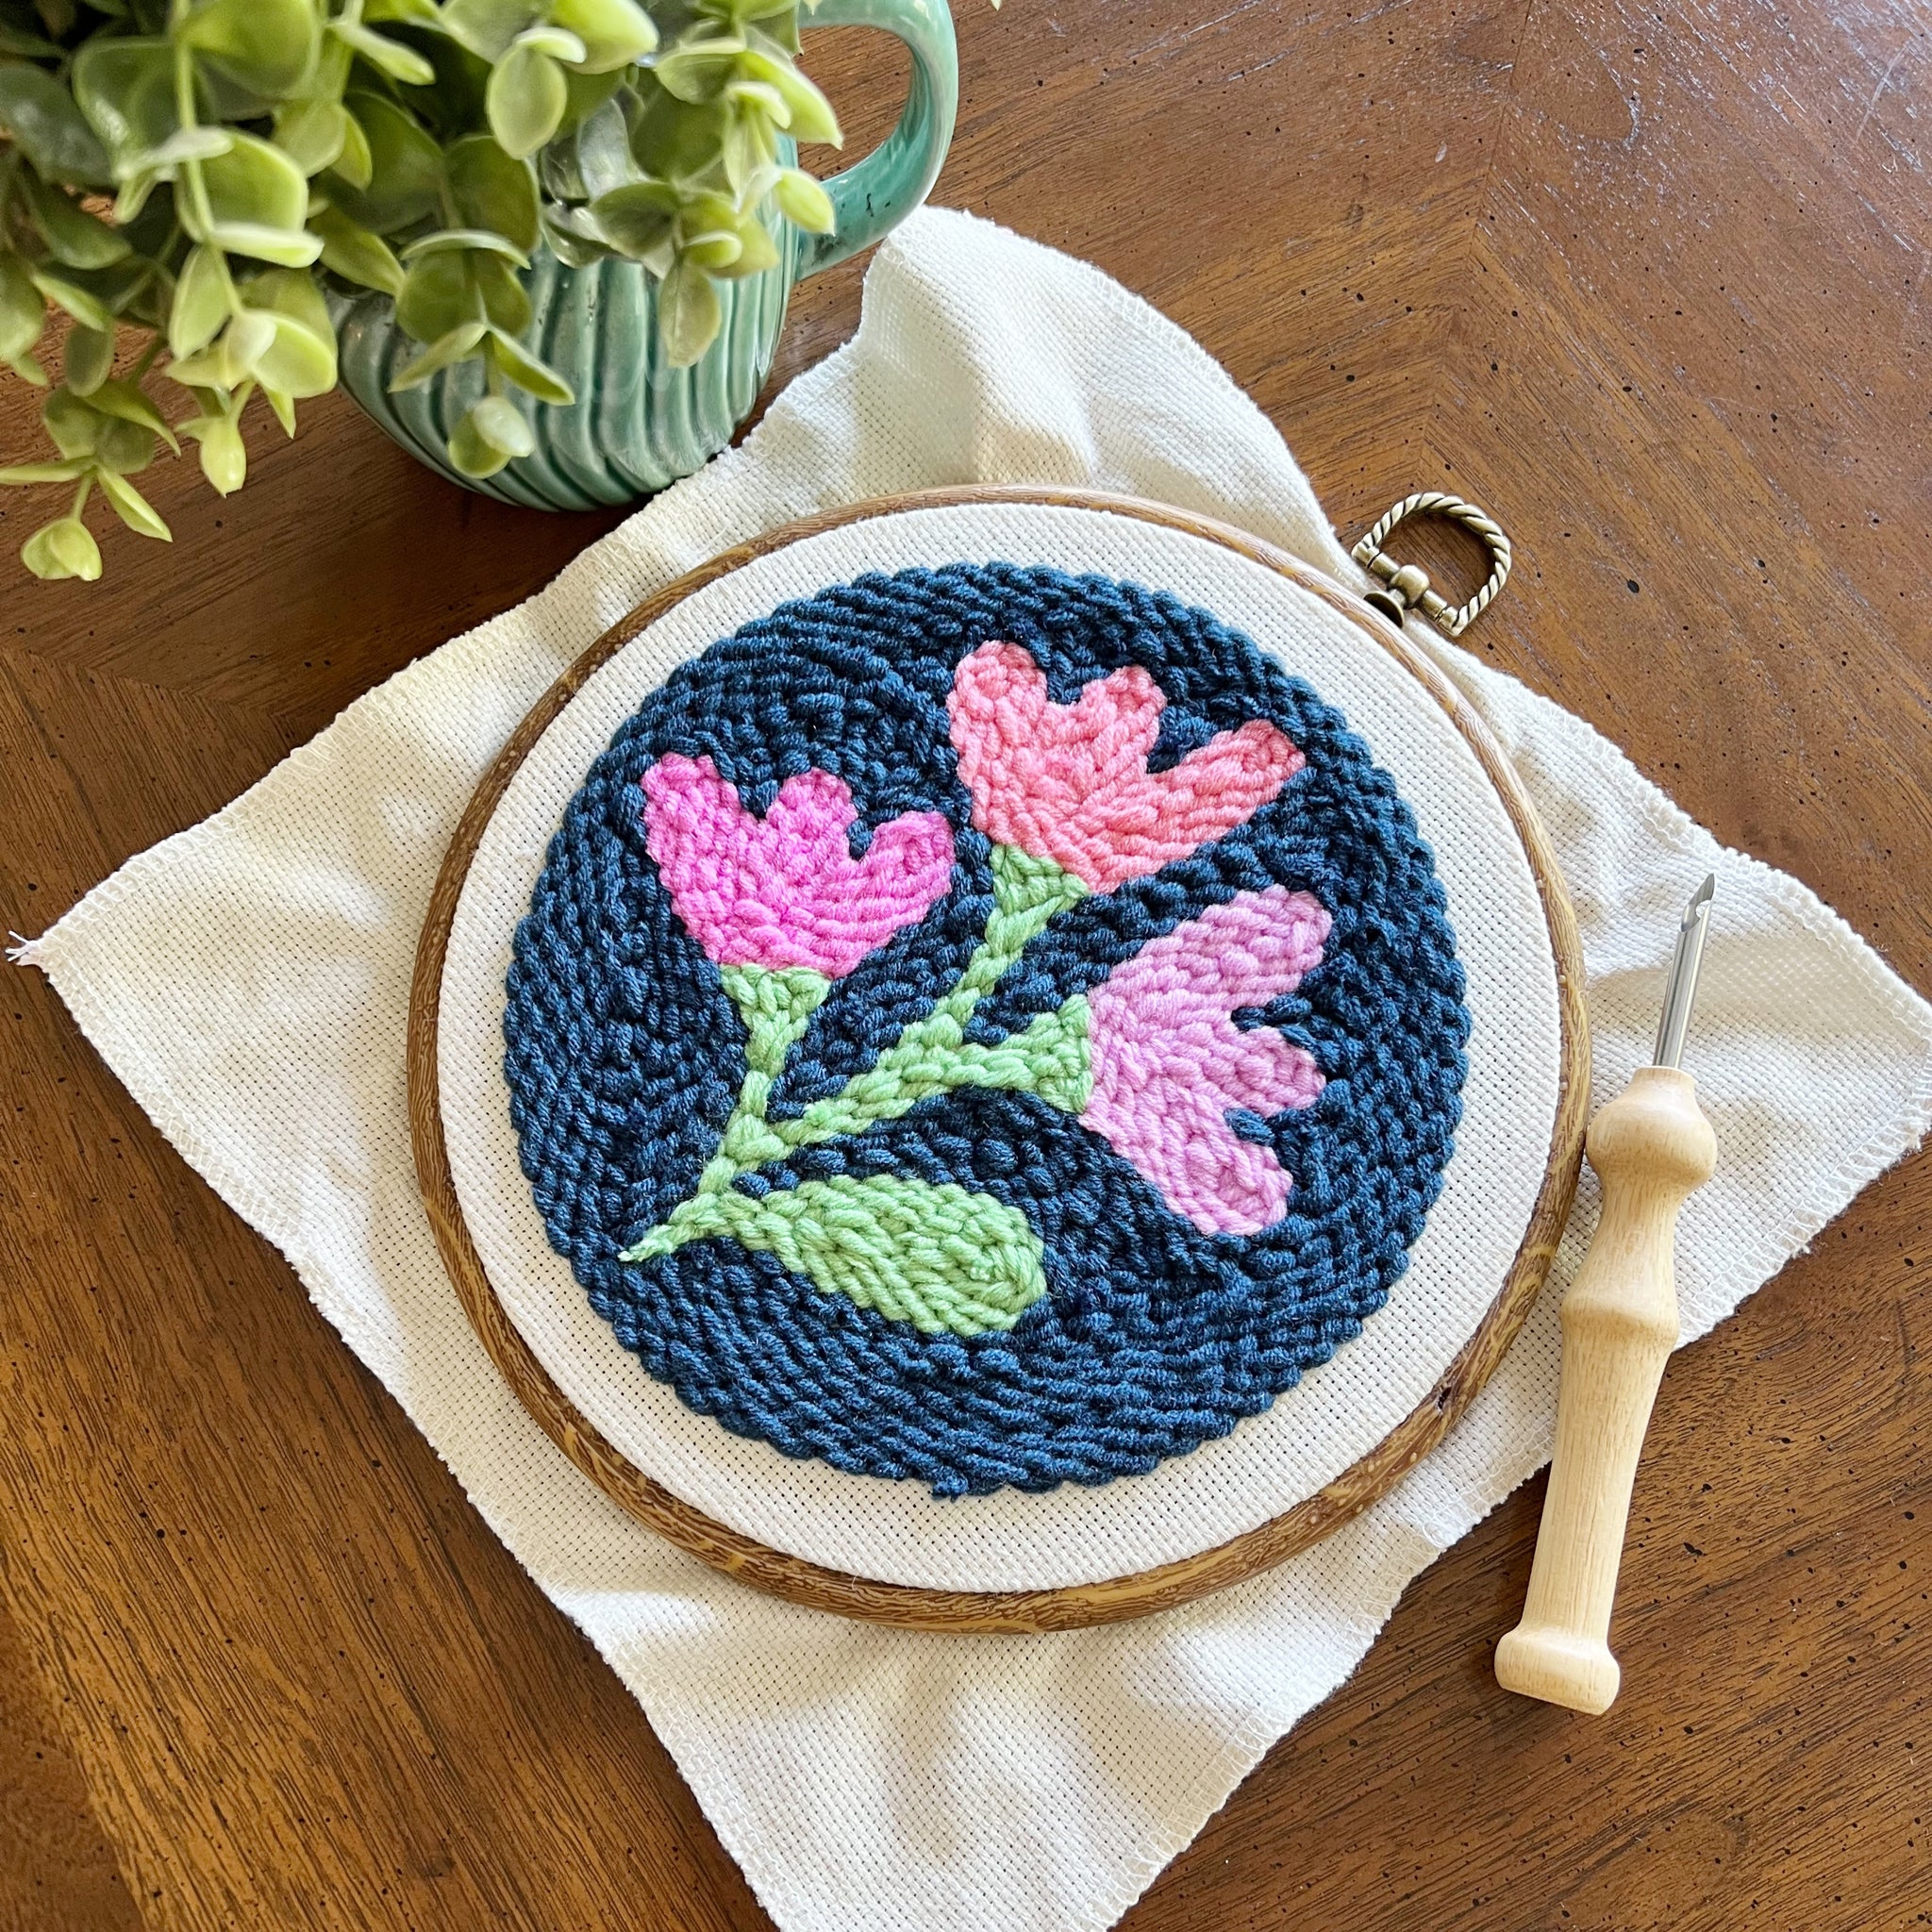 Punch Needle Embroidery kit DIY Flowers Cross Stitch Hoop Craft Kits